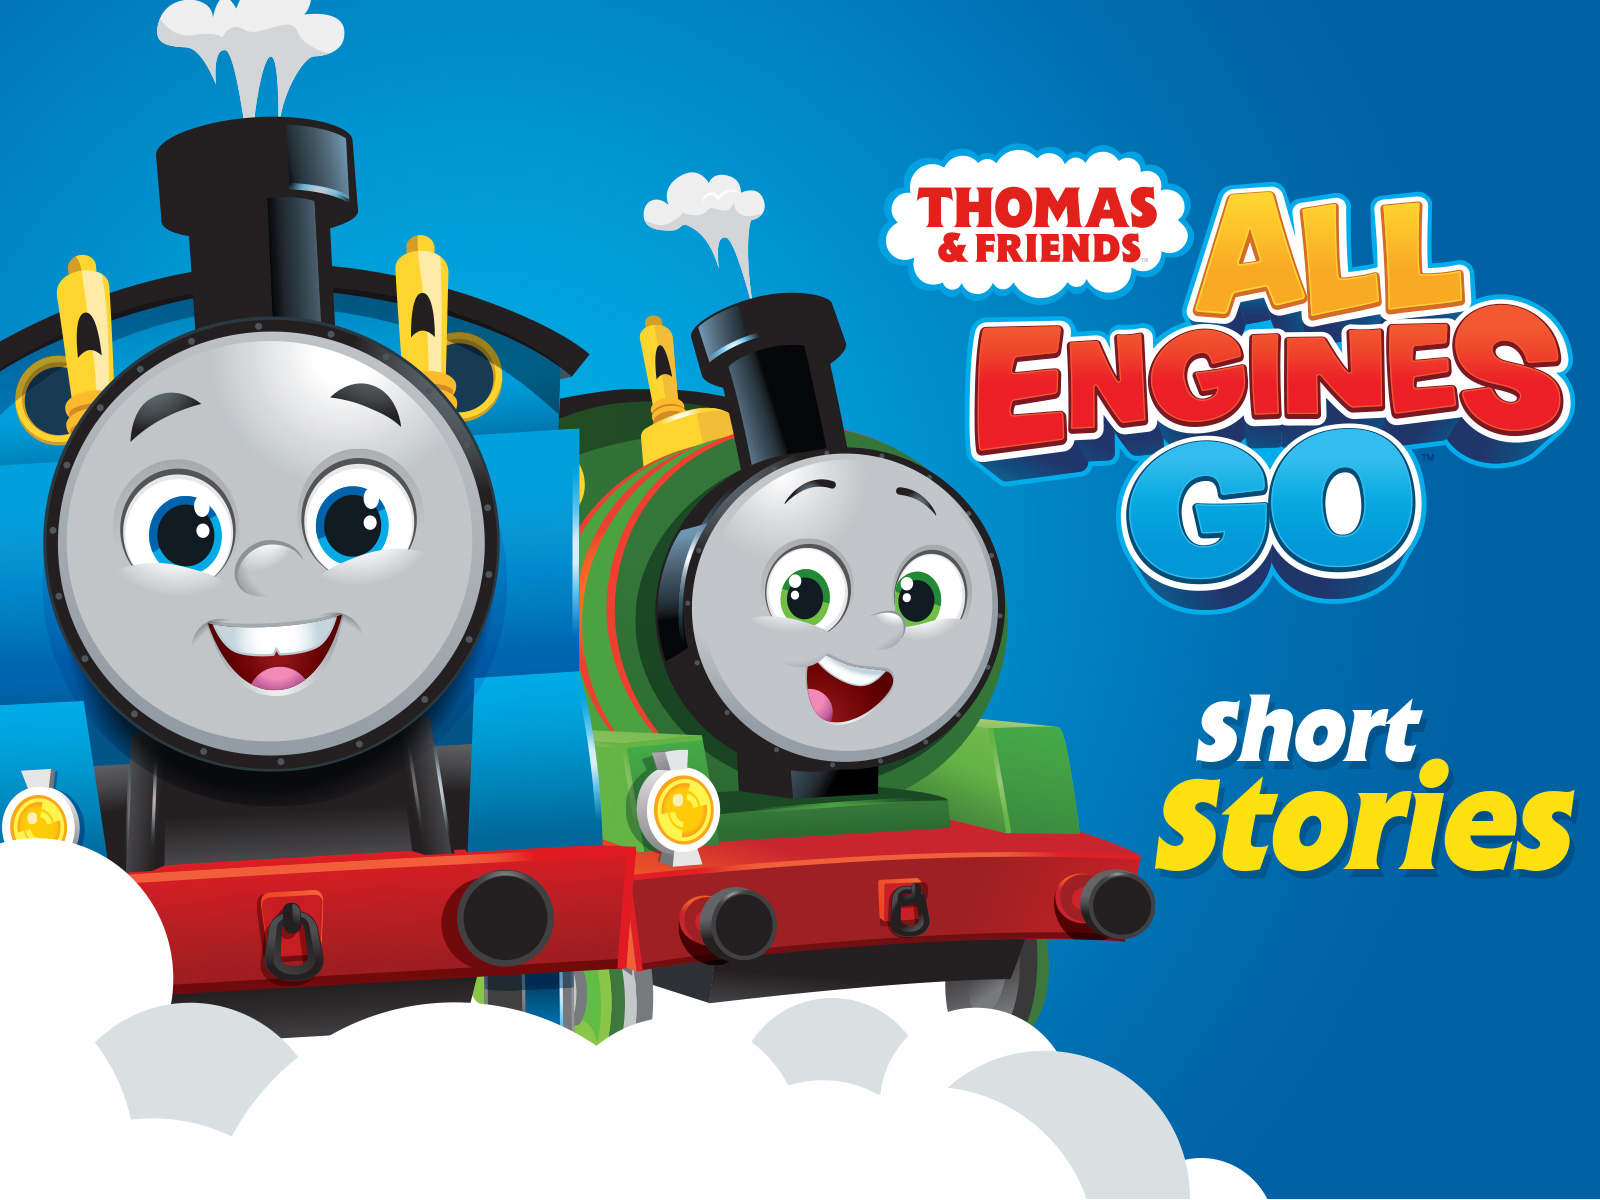 Prime Video: Thomas & Friends: All Engines Go Short Stories